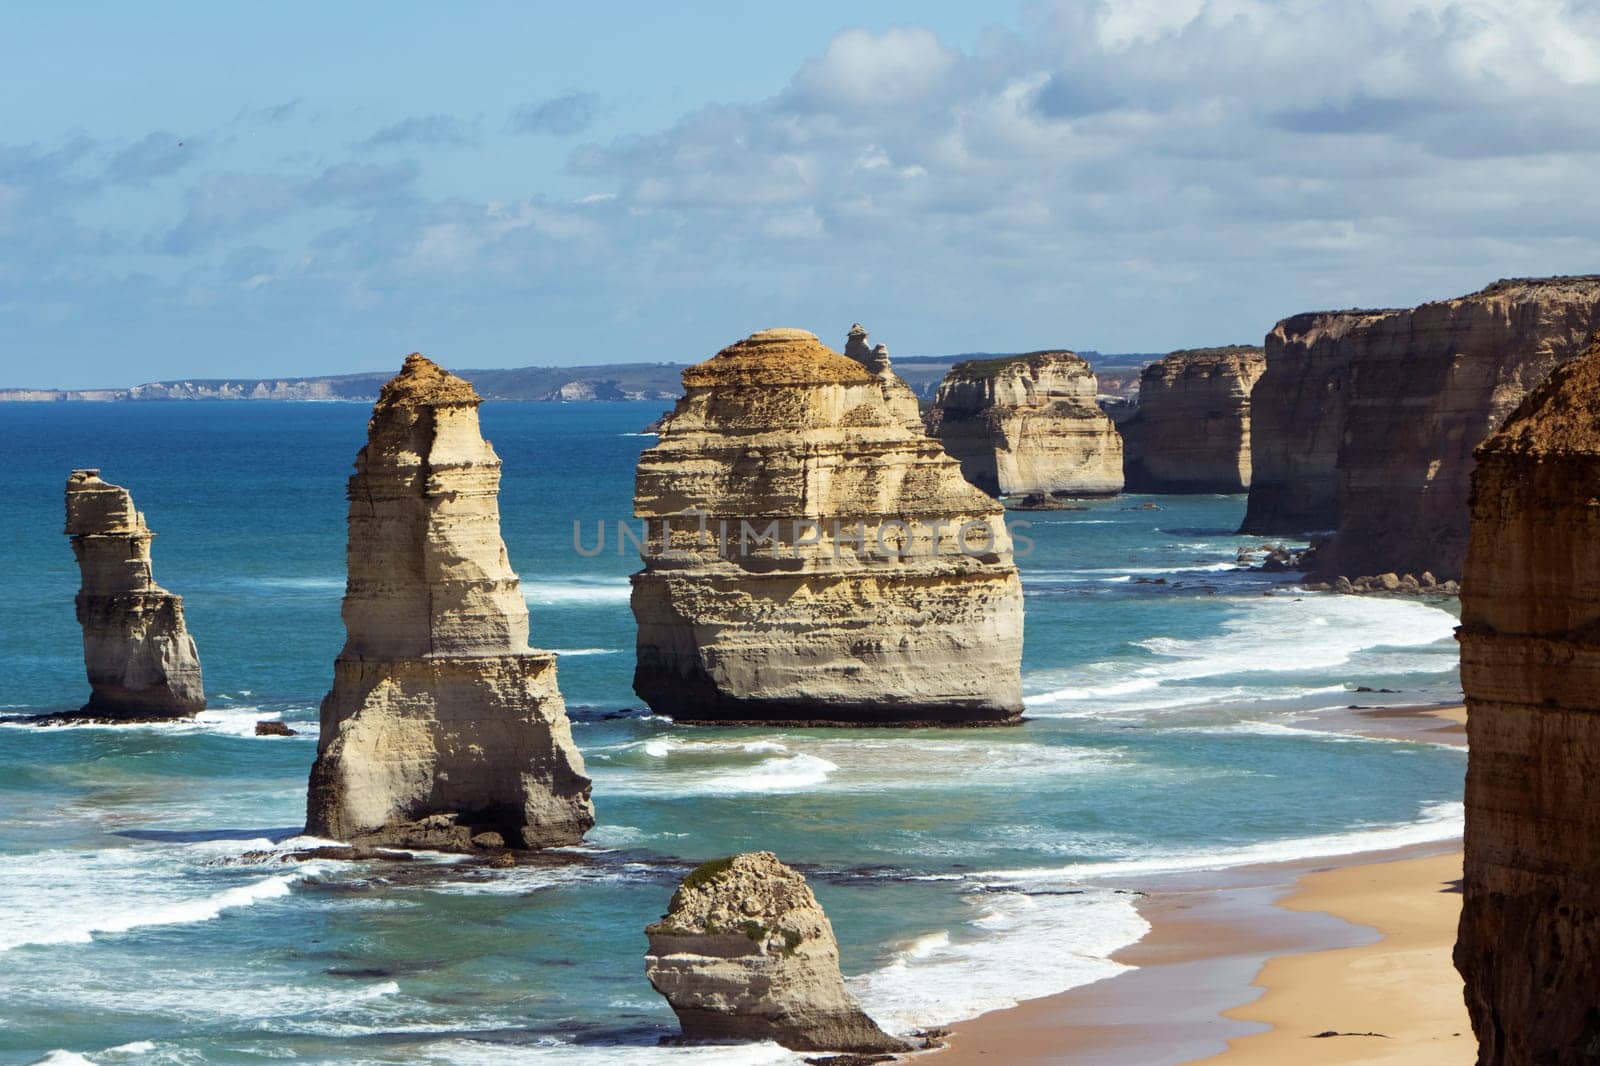 Beautiful shot of the famous Twelve Apostles geological structures by StefanMal